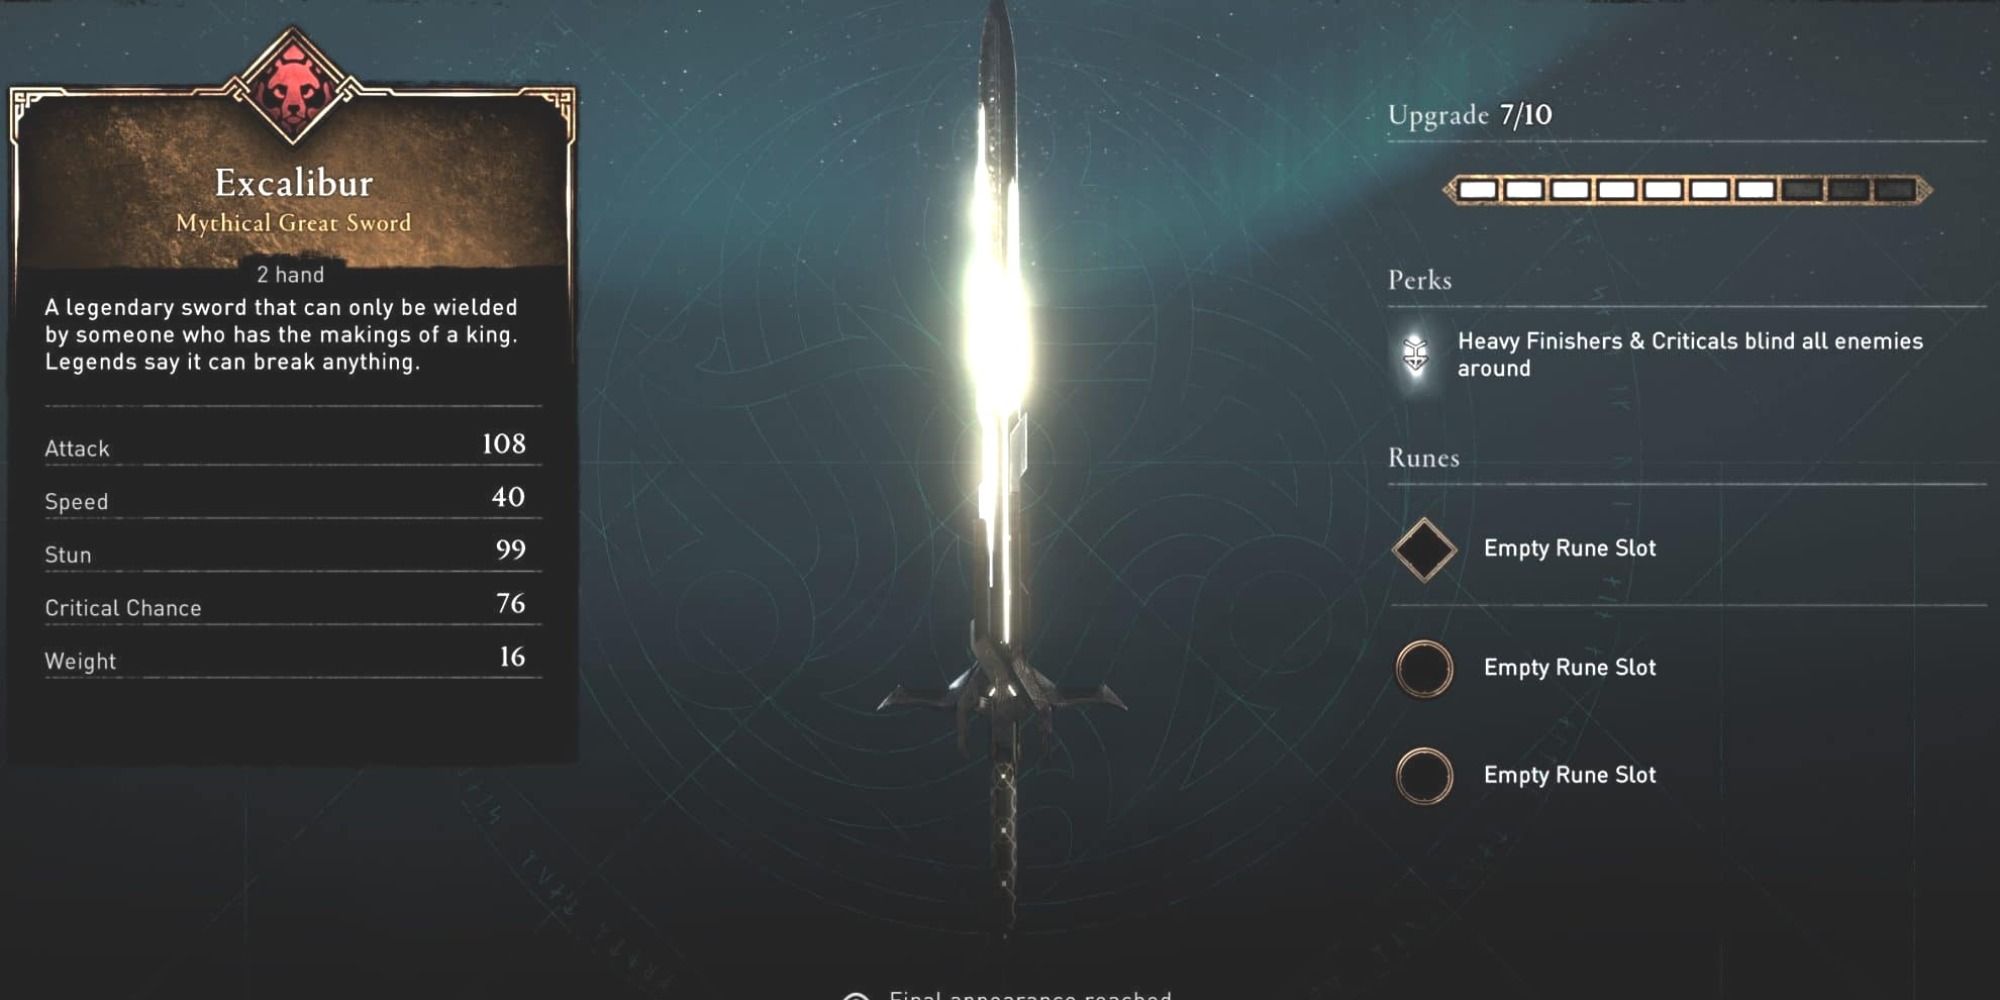 An image of Excalibur and its stats in Assassin's Creed: Valhalla